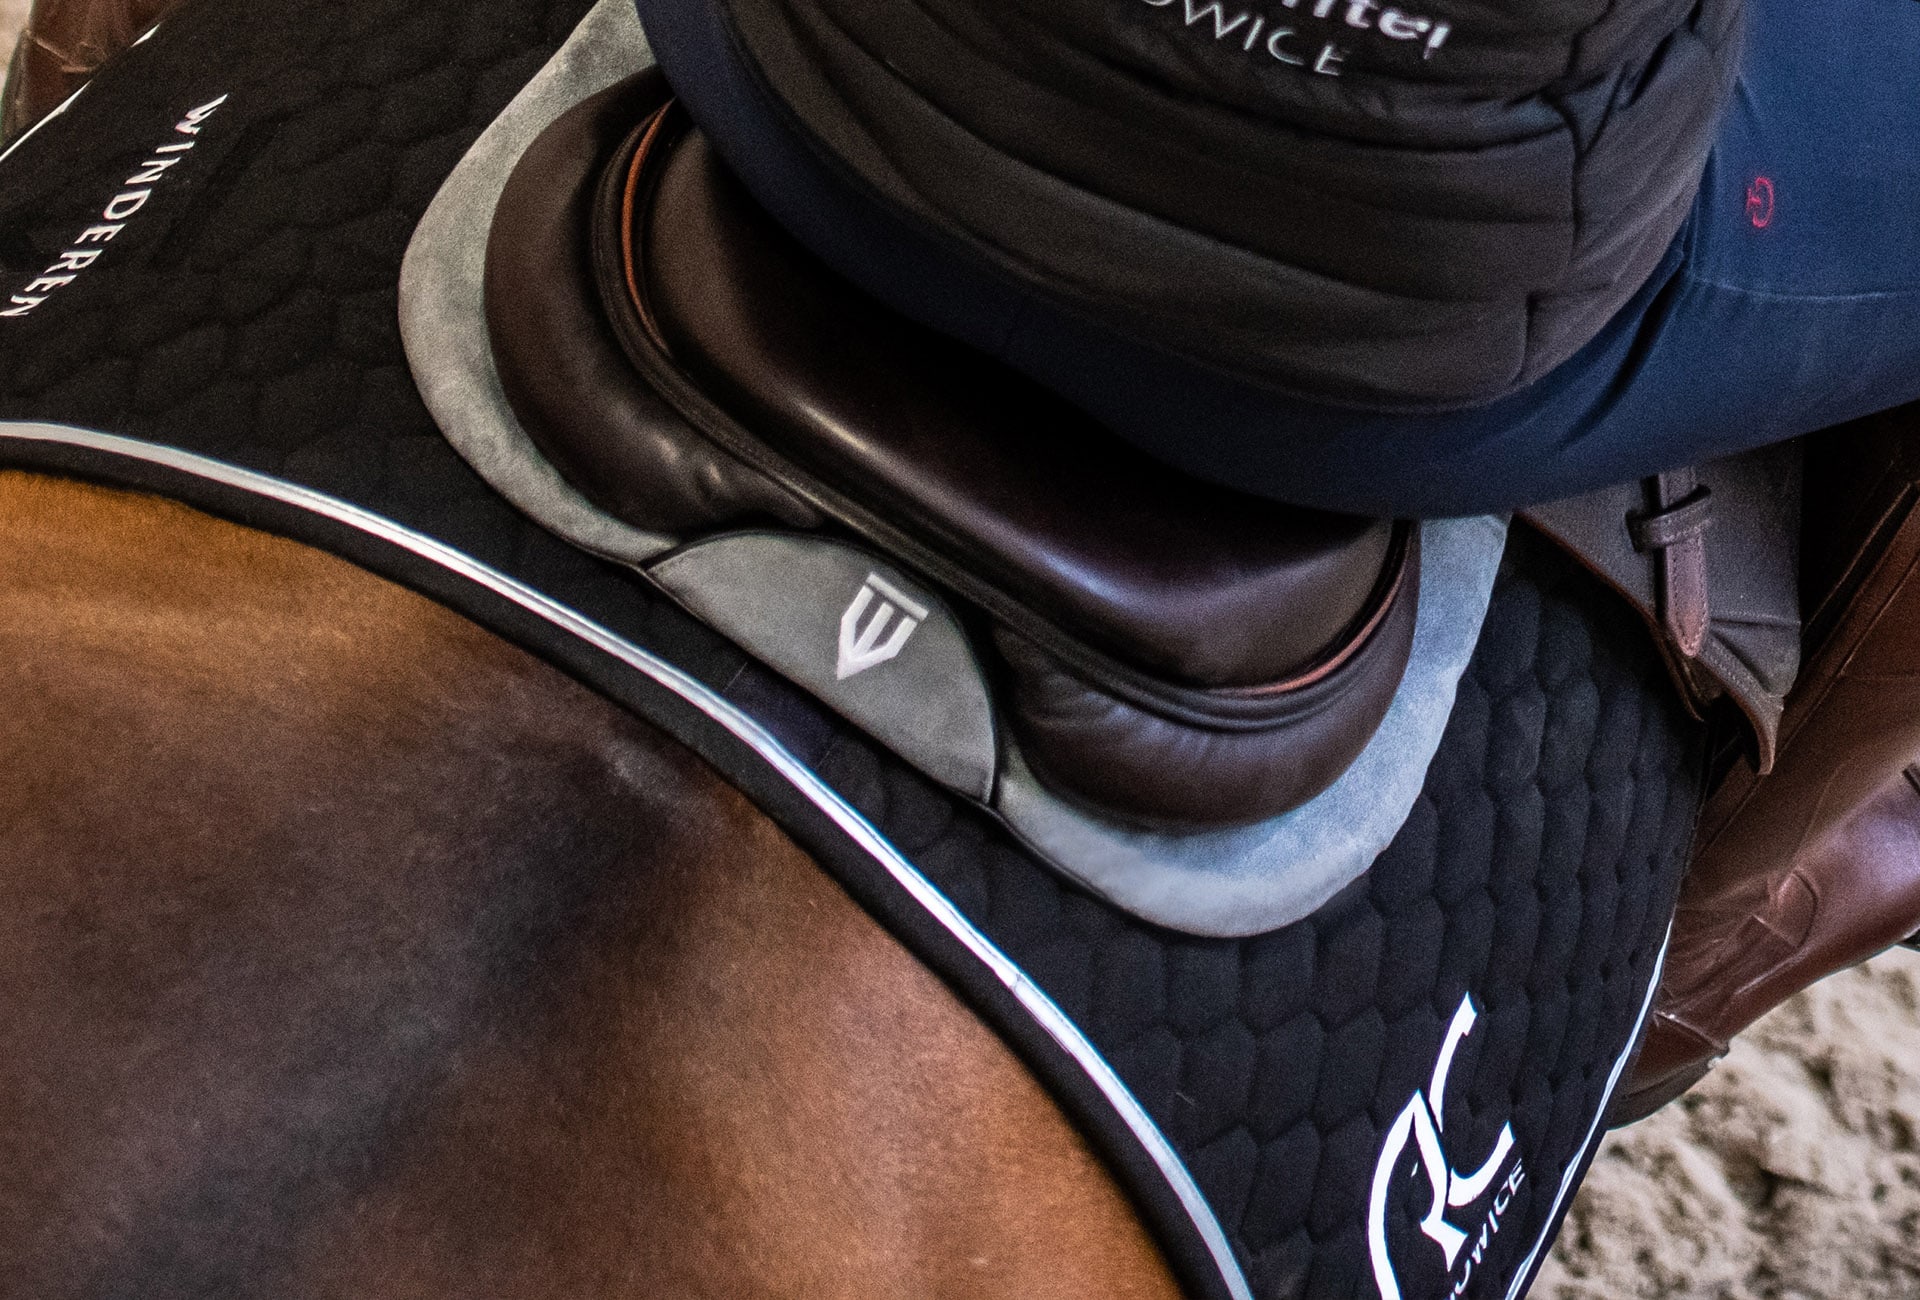 The best saddle half pad for your horse - how to choose?
